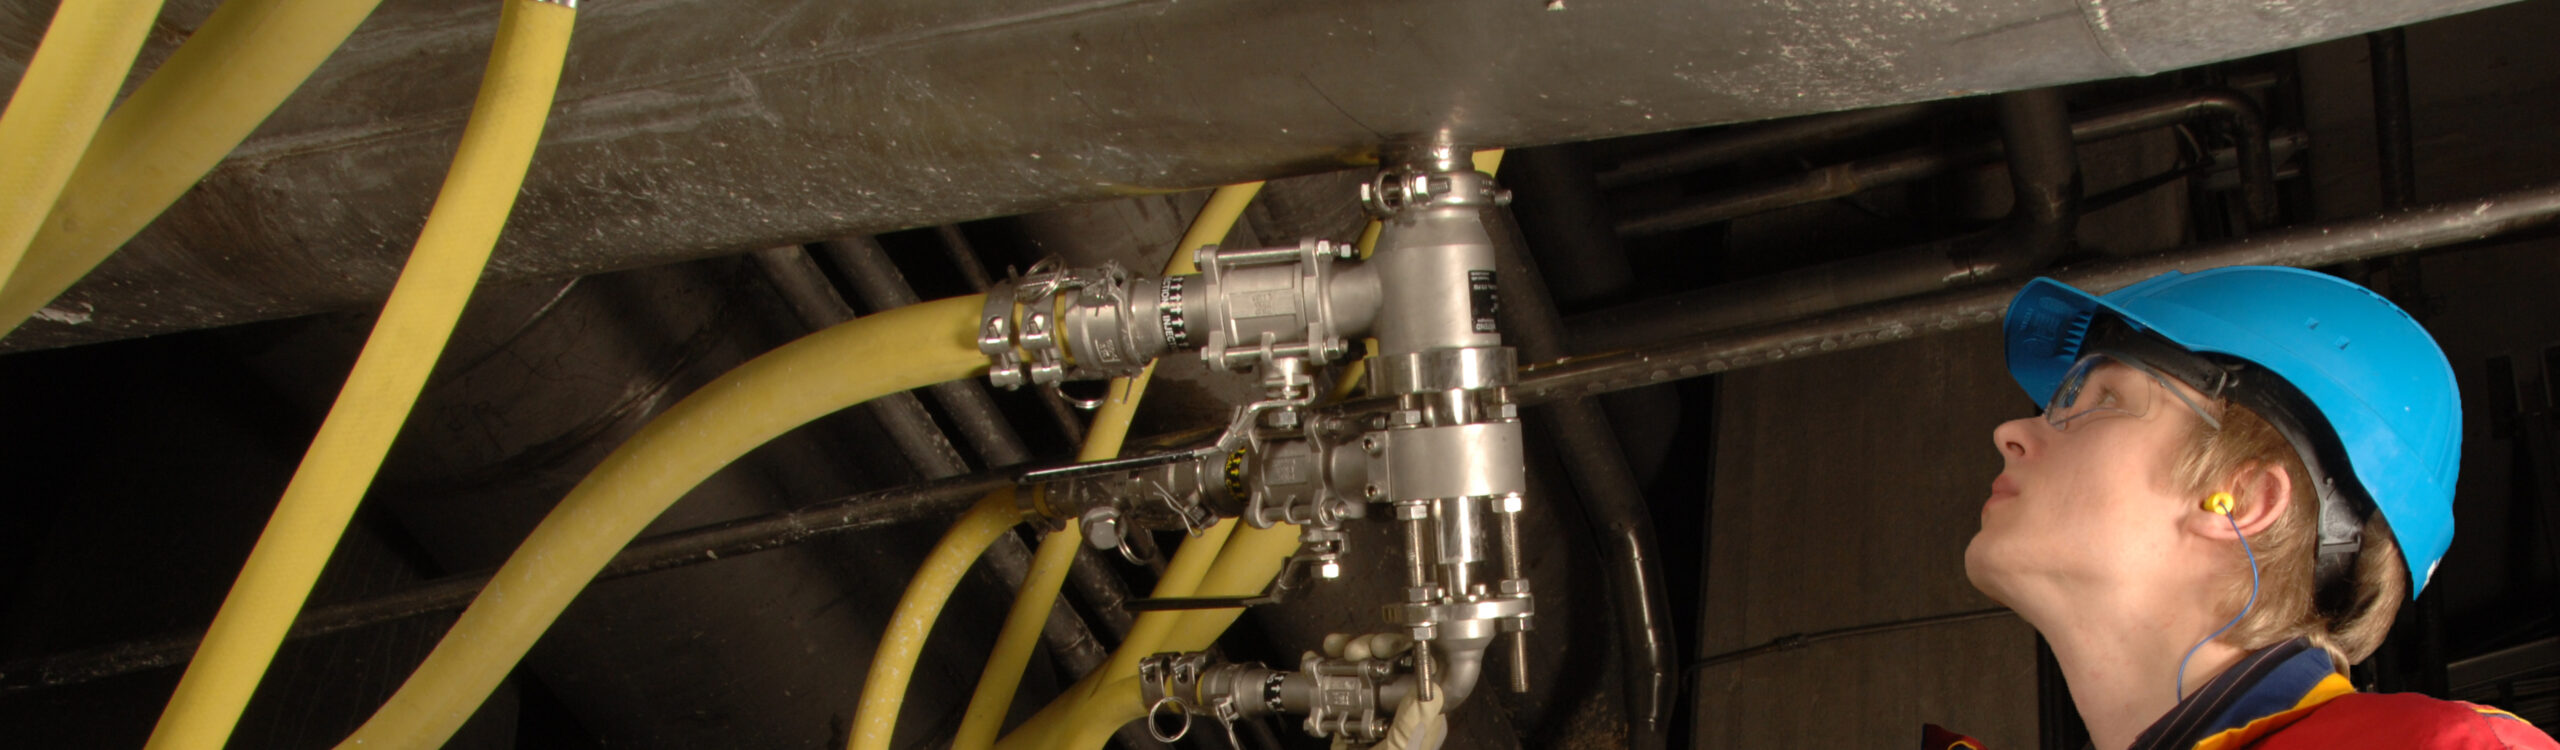 TrumpJet Flash Mixing  installed to the headbox feed pipe of a paper machine 